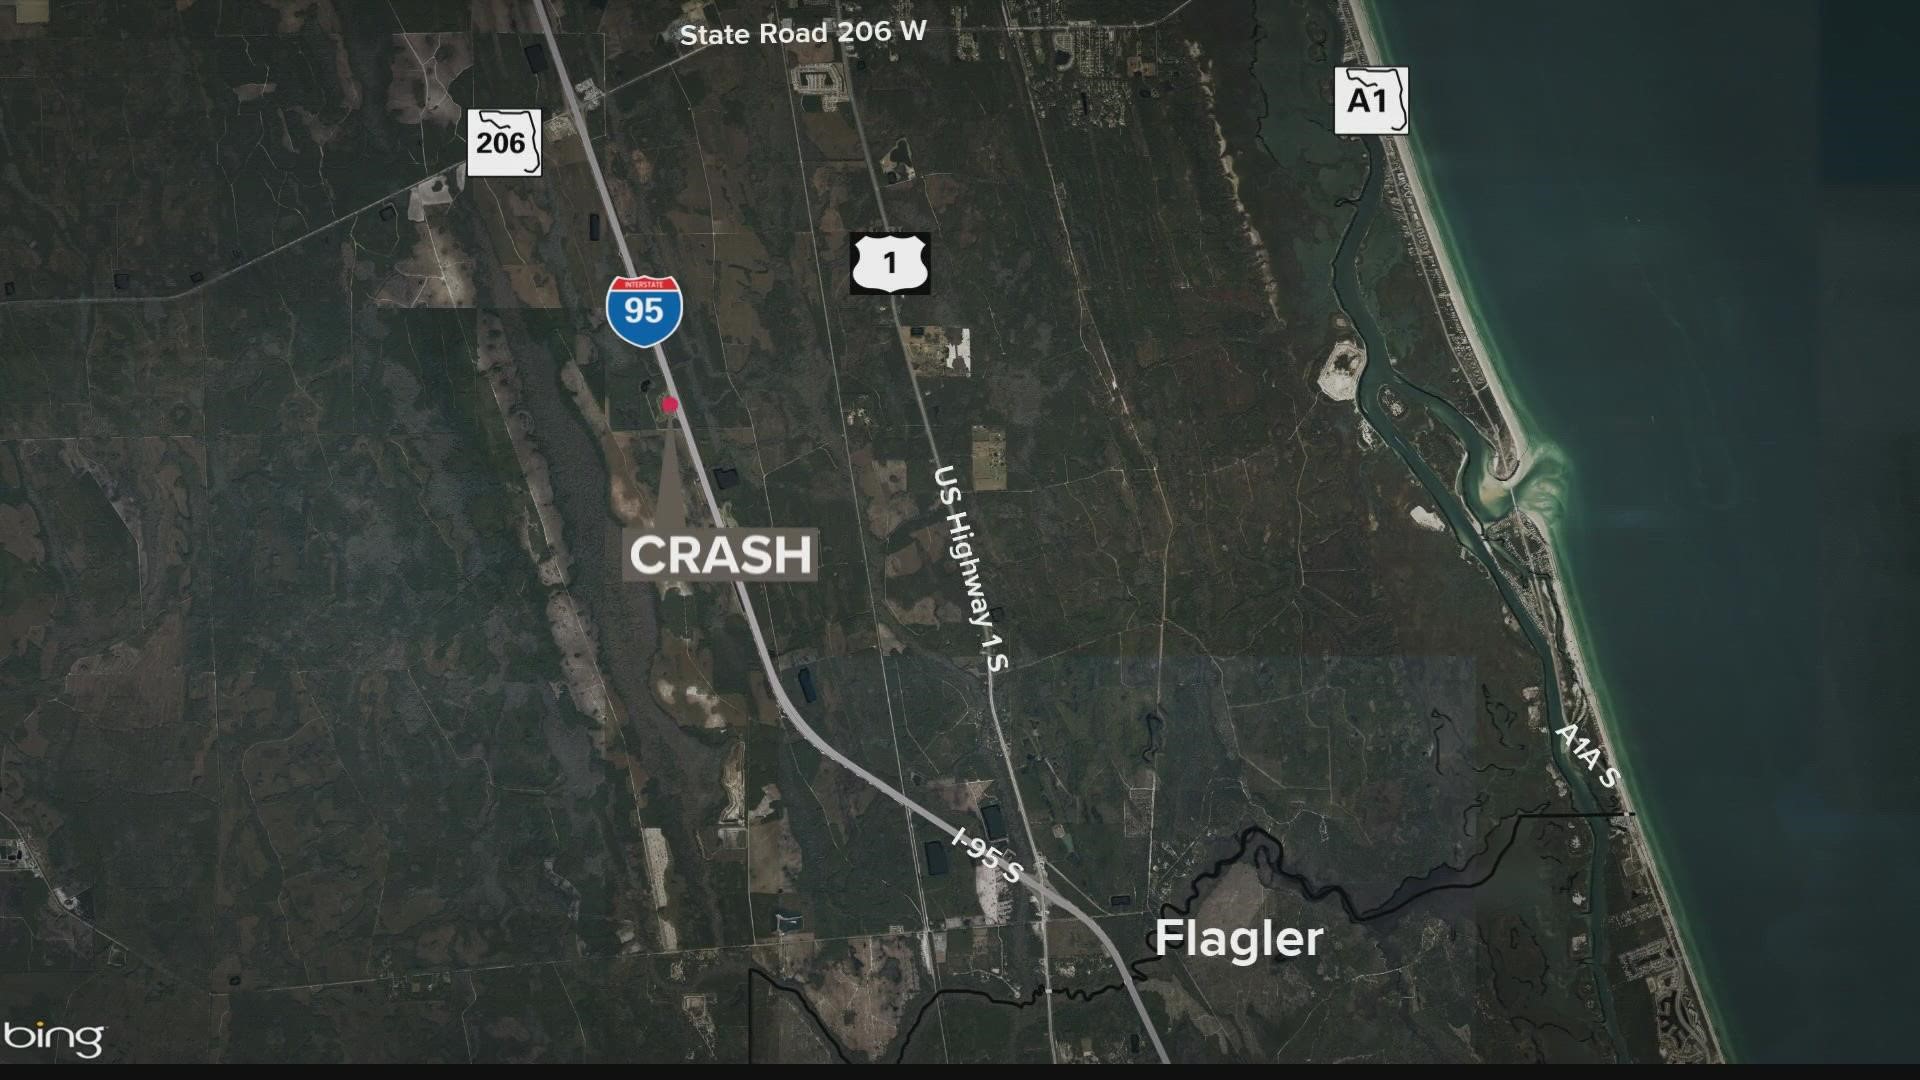 An 18-year-old boy and a 3-month-old baby from Jacksonville were seriously injured. Neither were secured in the car by a seat belt or restraint.